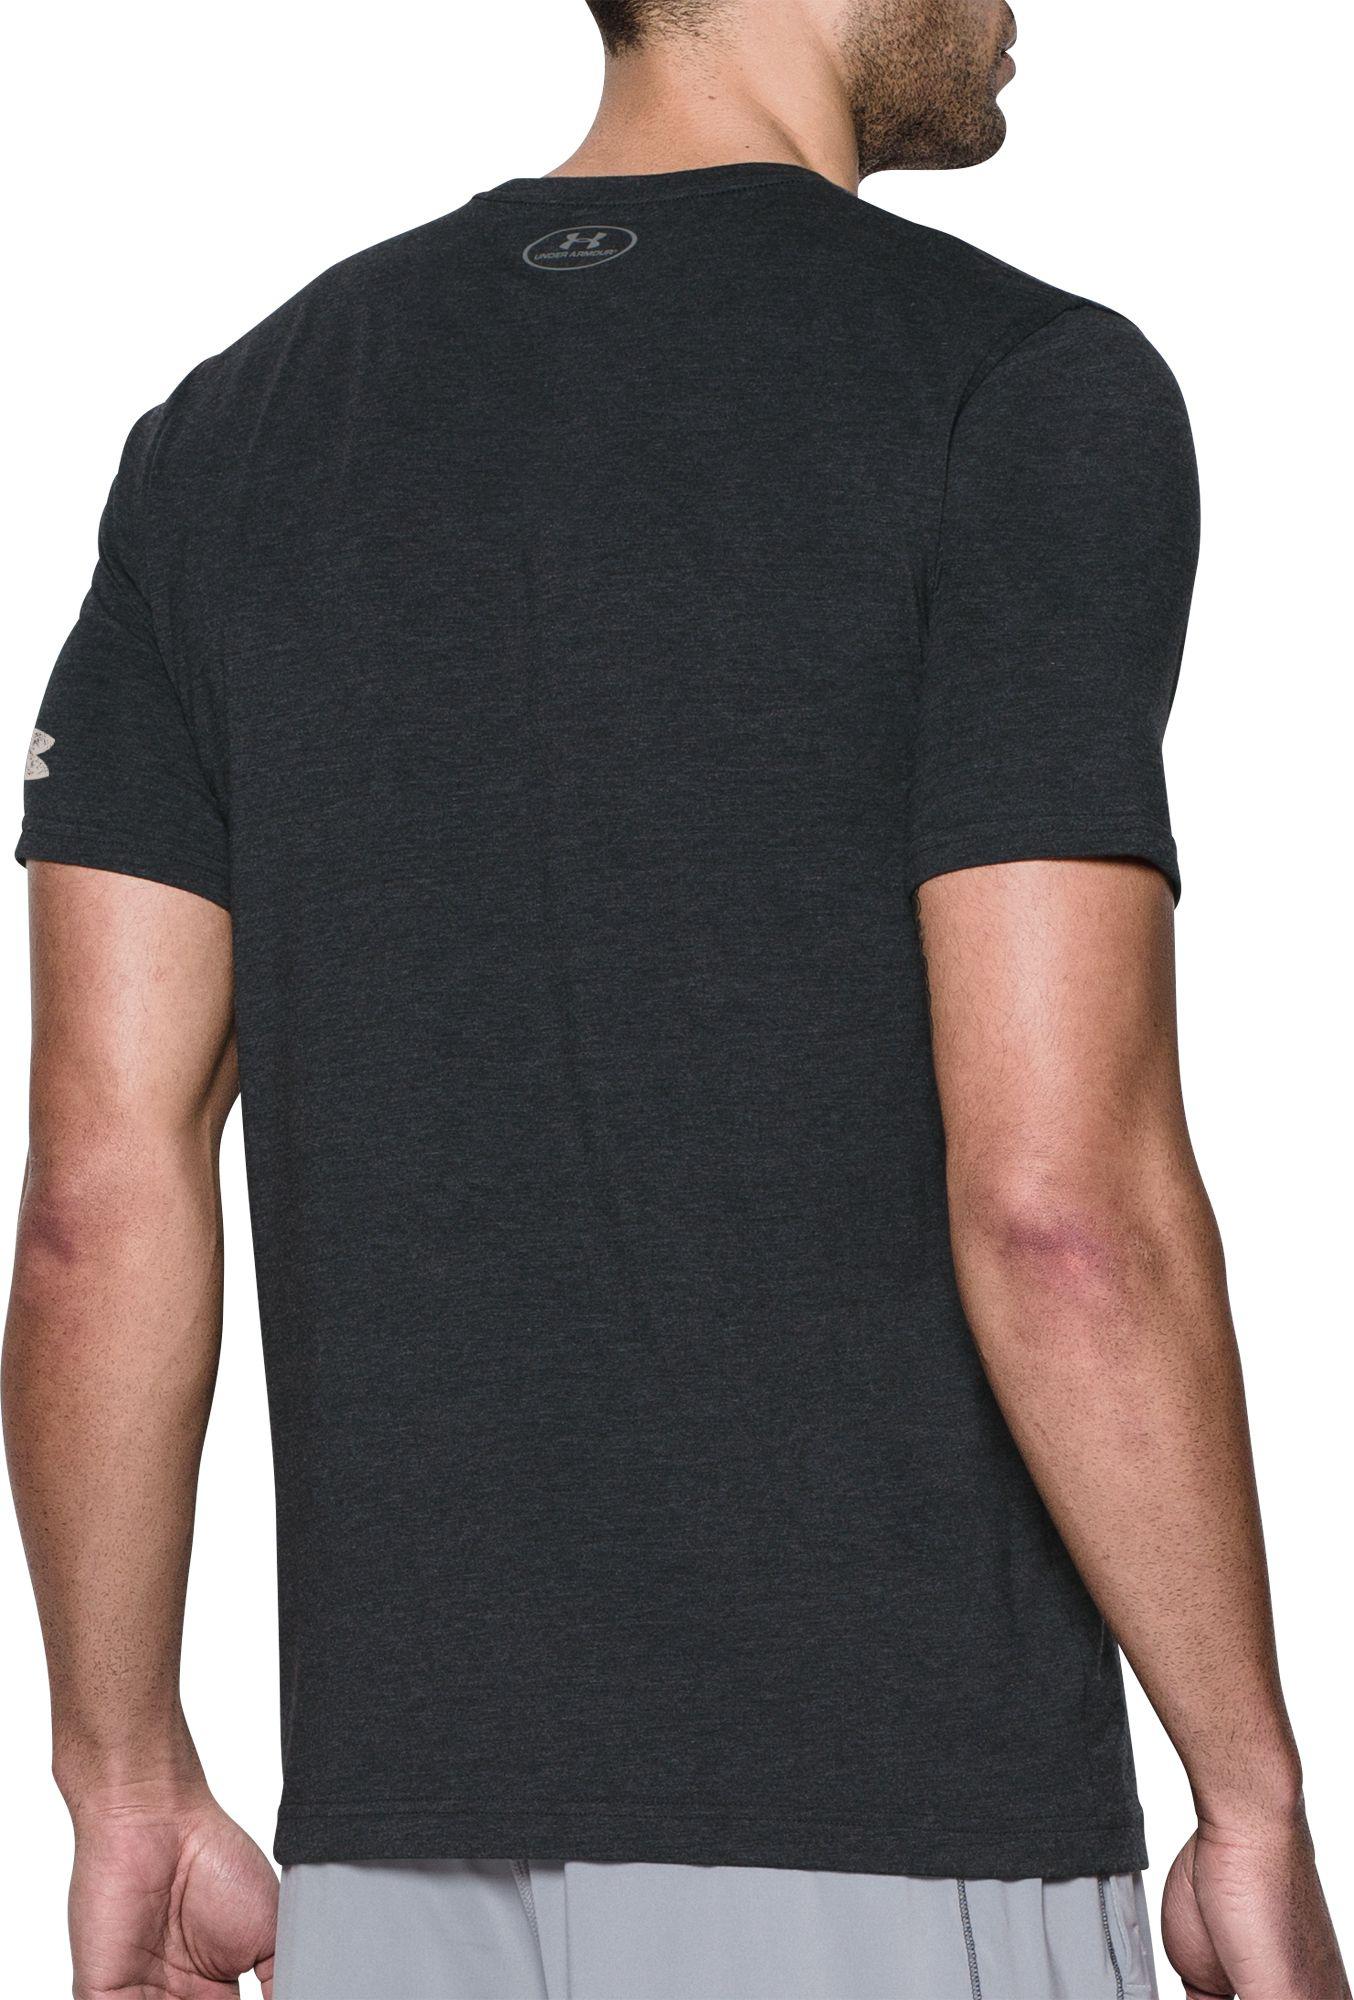 Download Under Armour Cotton Humble Hungry Graphic T-shirt in Black ...